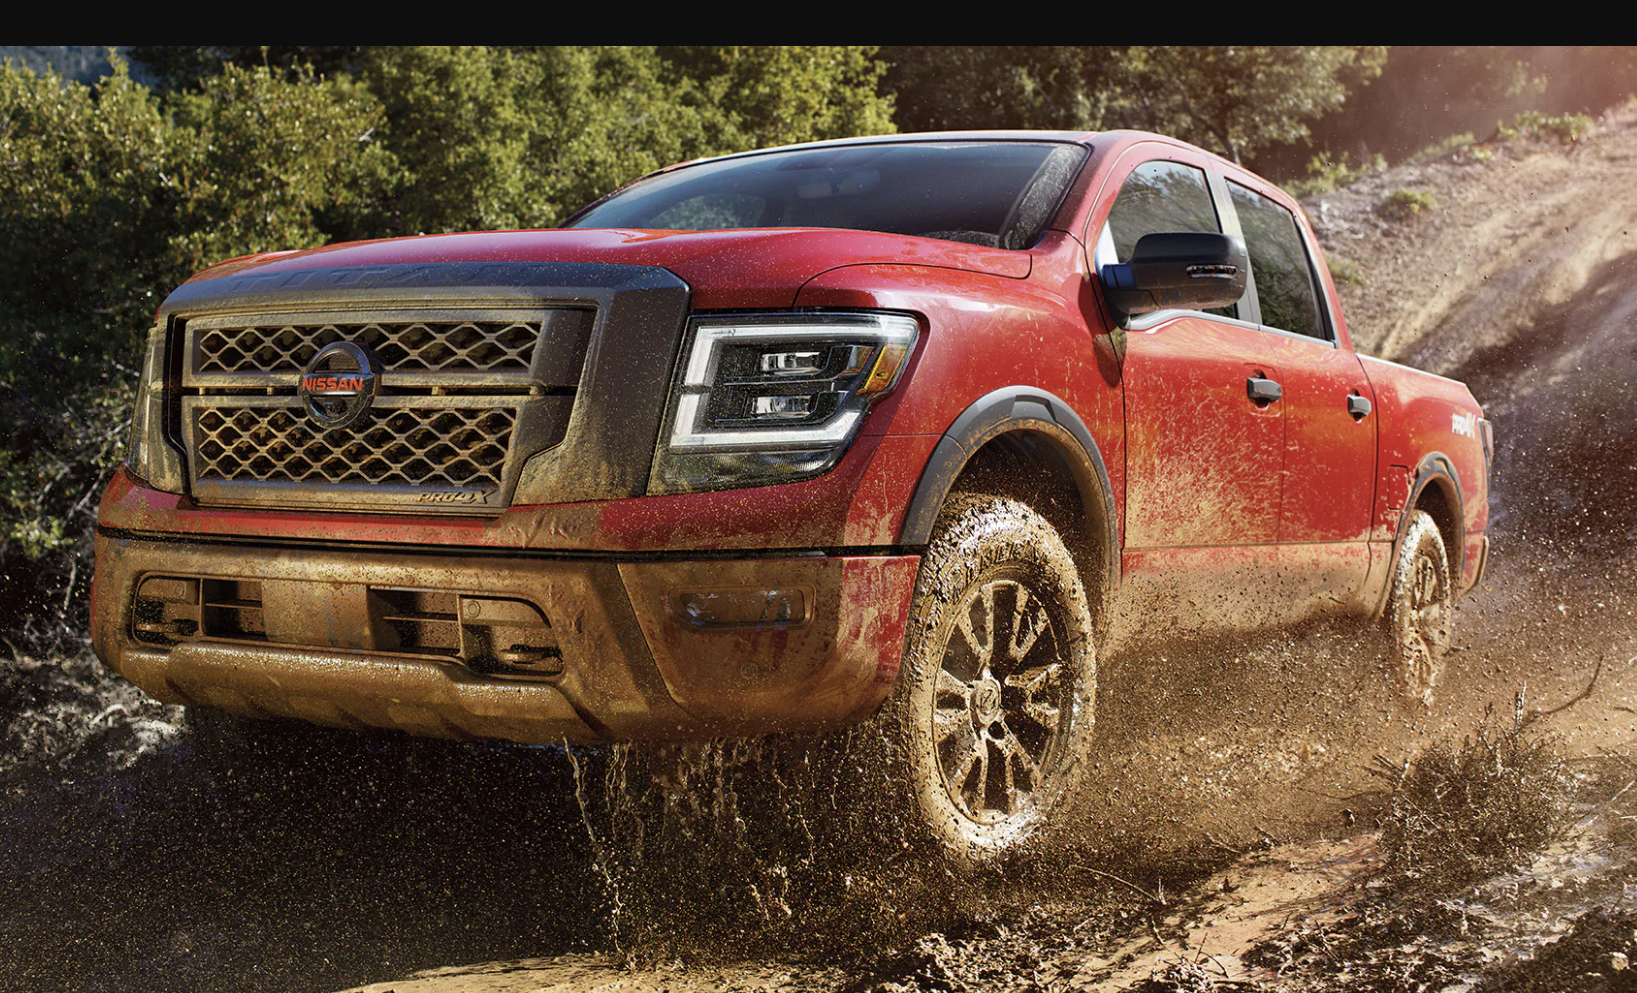 2022 Nissan Titan for Sale or Lease | Balise Nissan of Warwick